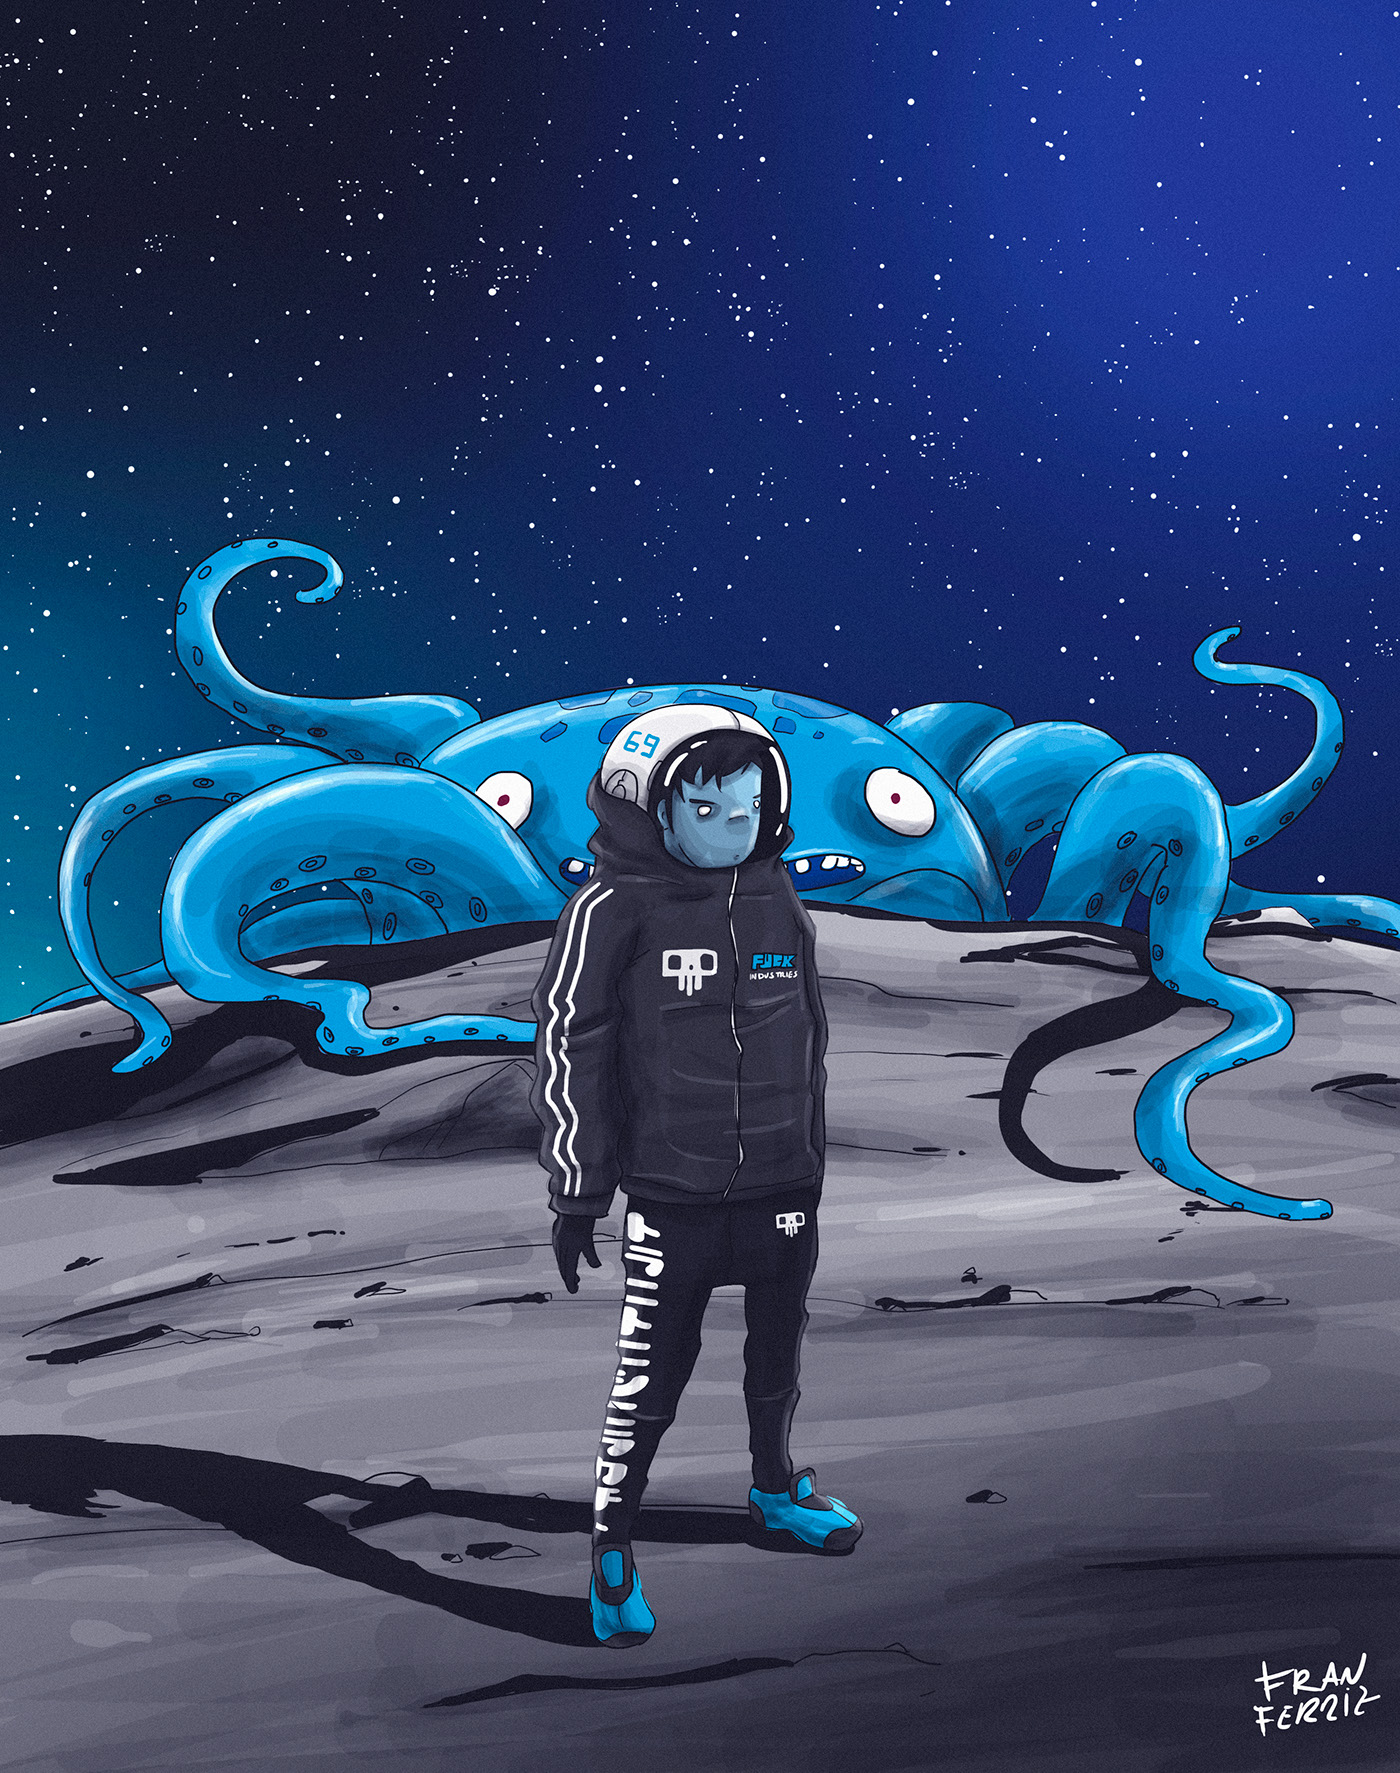 Drawing  ILLUSTRATION  Space  Scifi octopus astronaut characterdesign photoshop